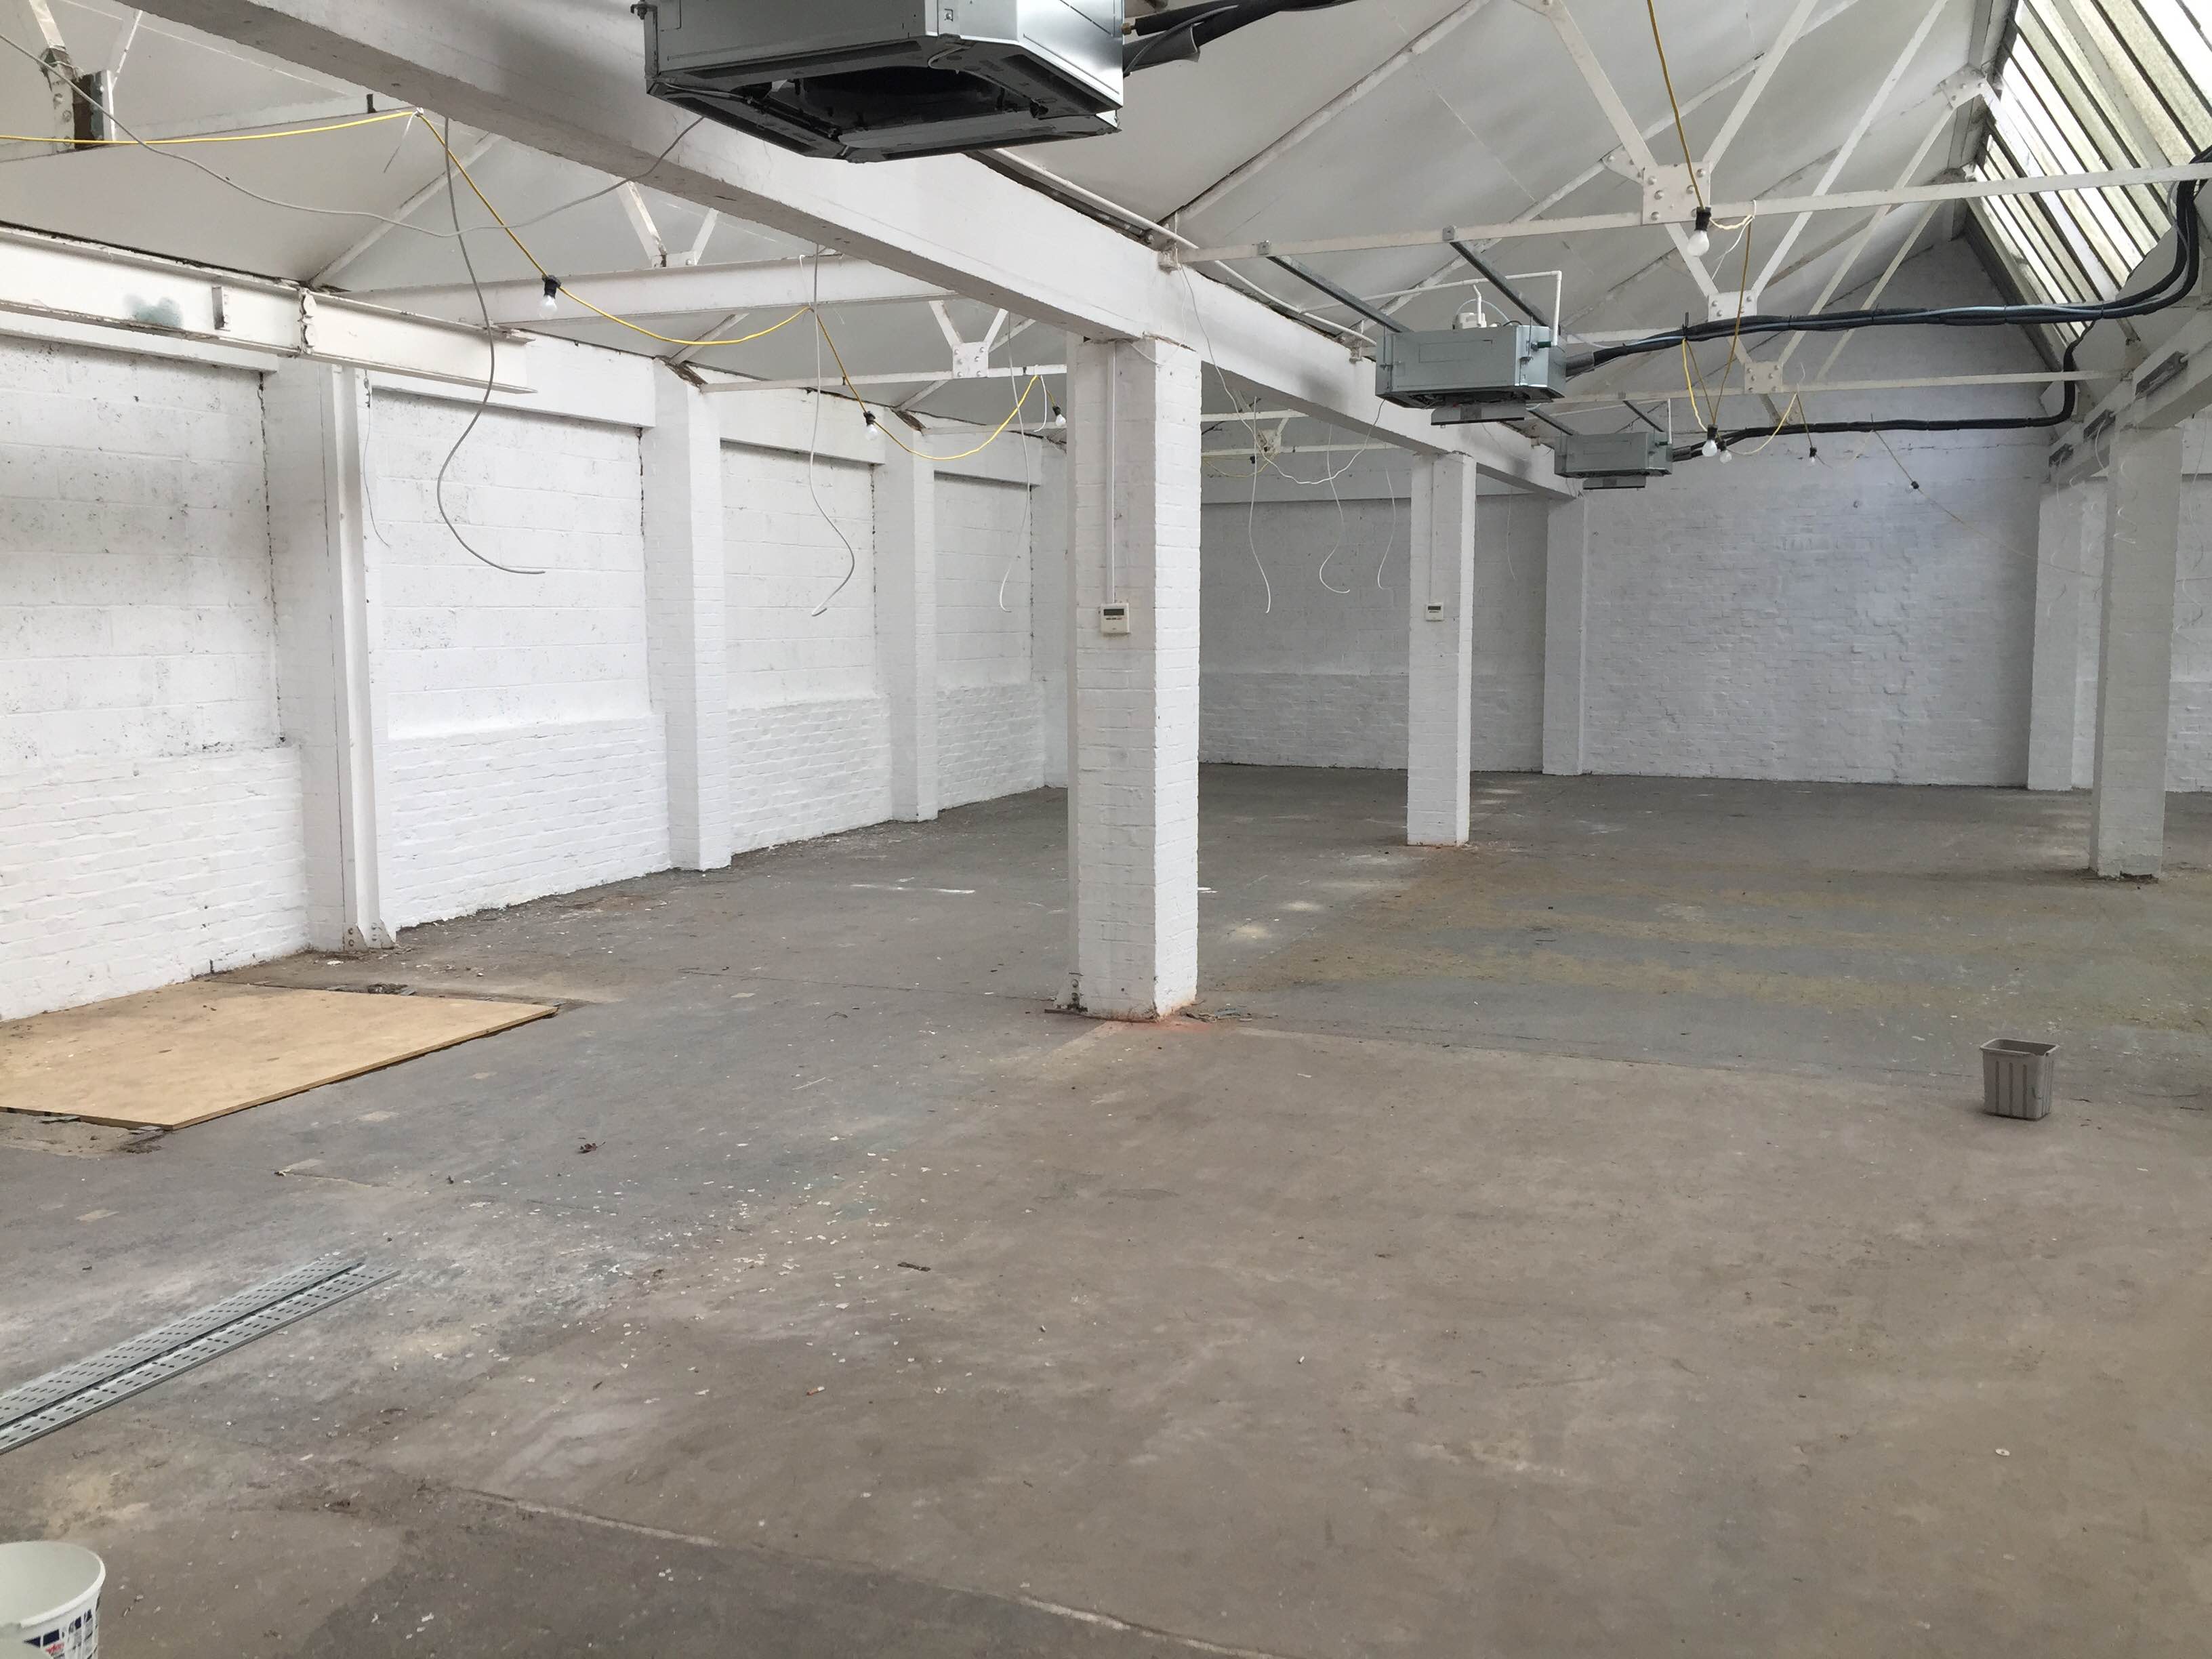 How do you rent warehouse space?